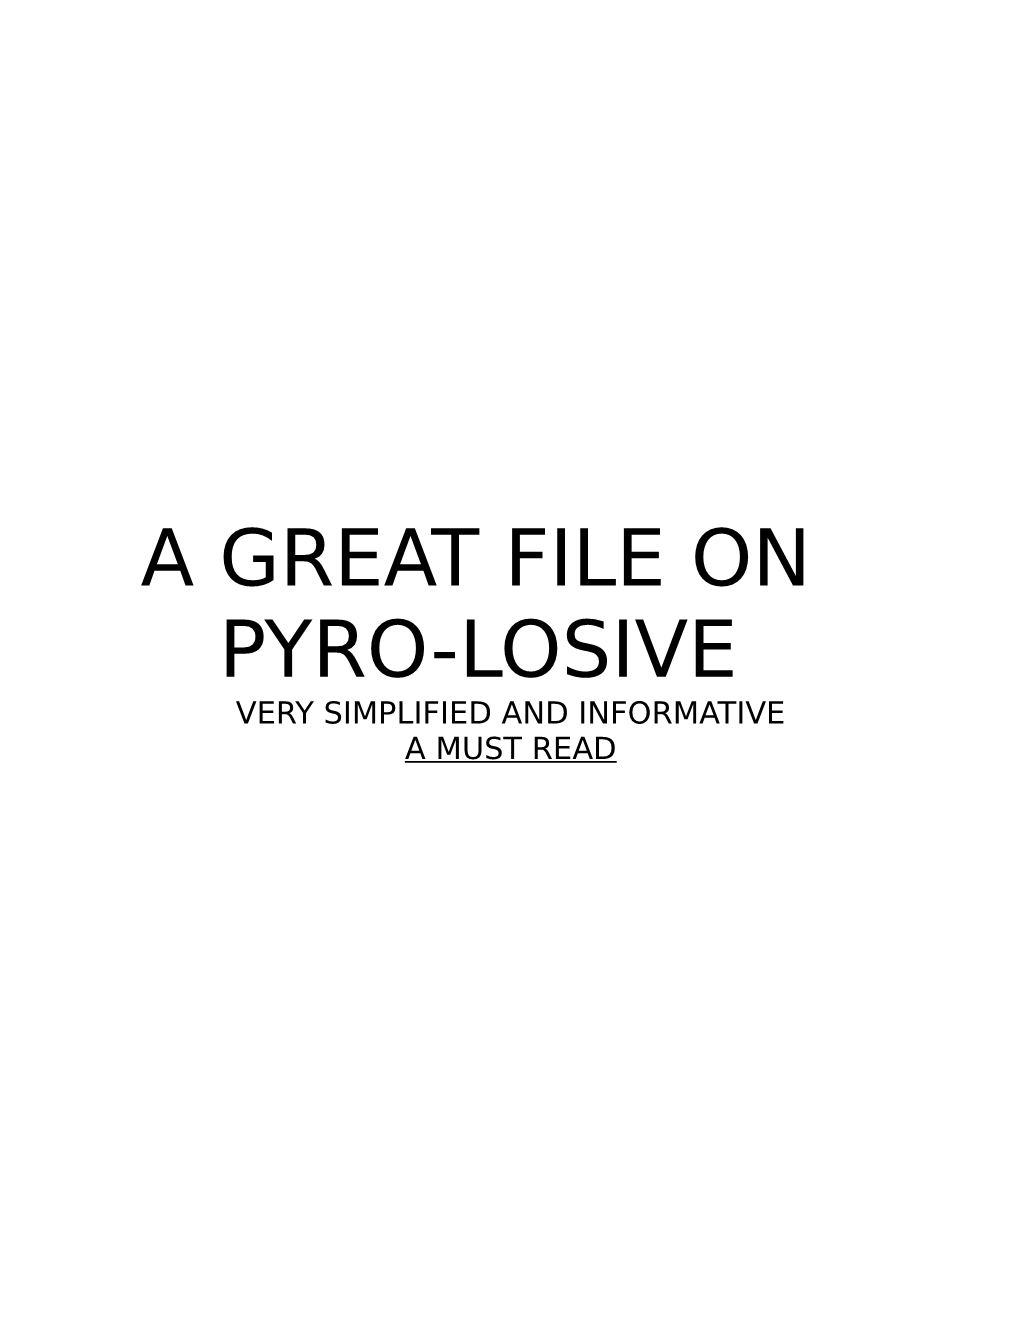 A Great File on Pyro-Losive